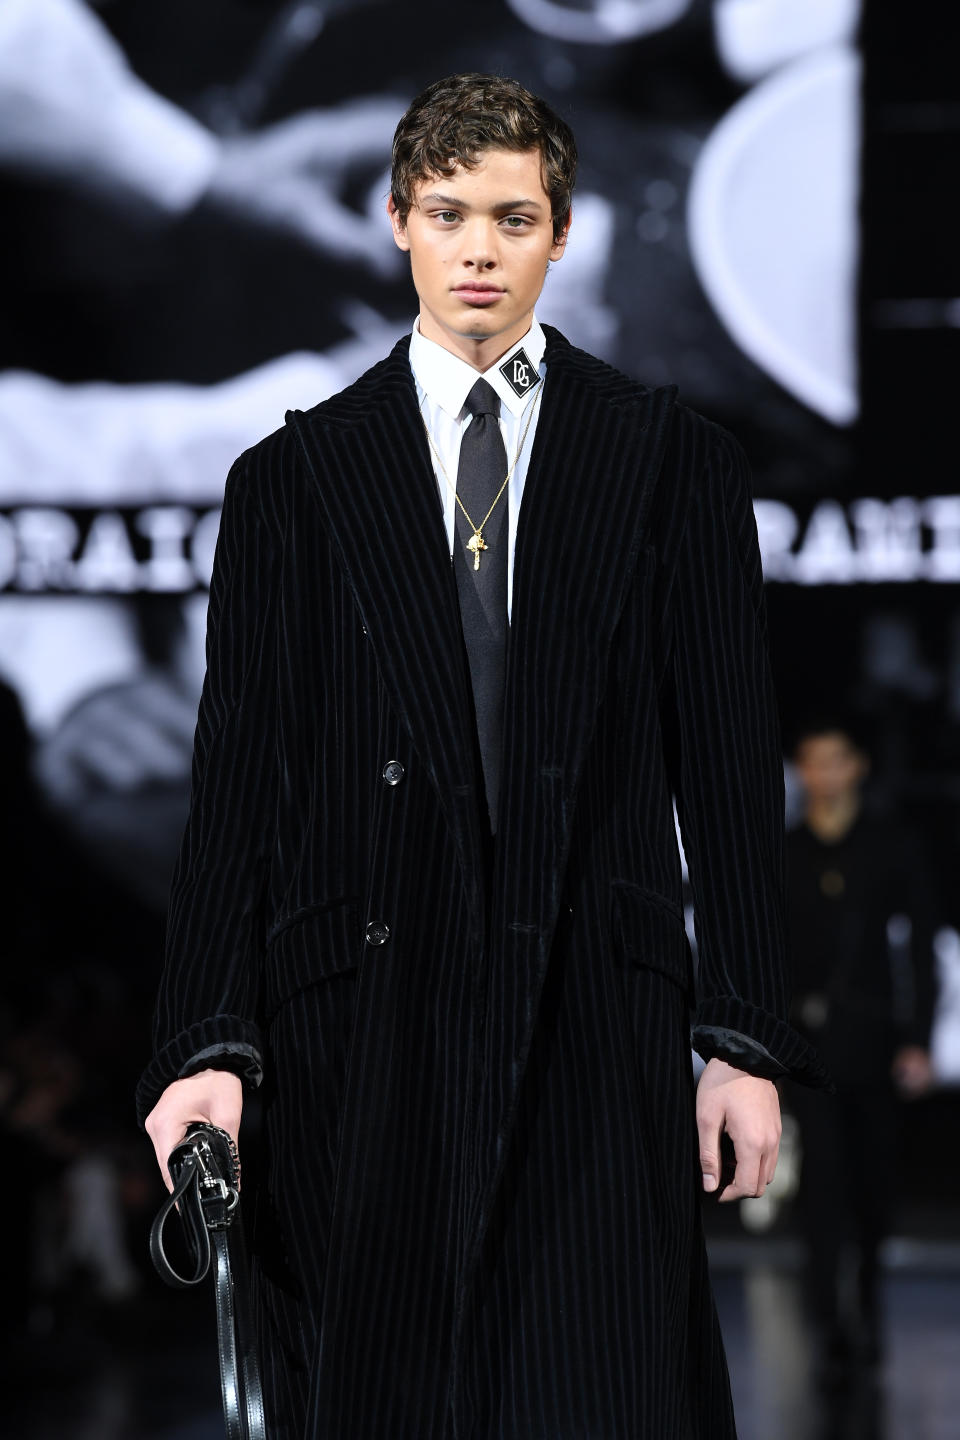 Bobby Brazier walks the runway at the Dolce e Gabbana fashion show on January 11, 2020 in Milan, Italy. (Photo by Daniele Venturelli/Daniele Venturelli/WireImage )